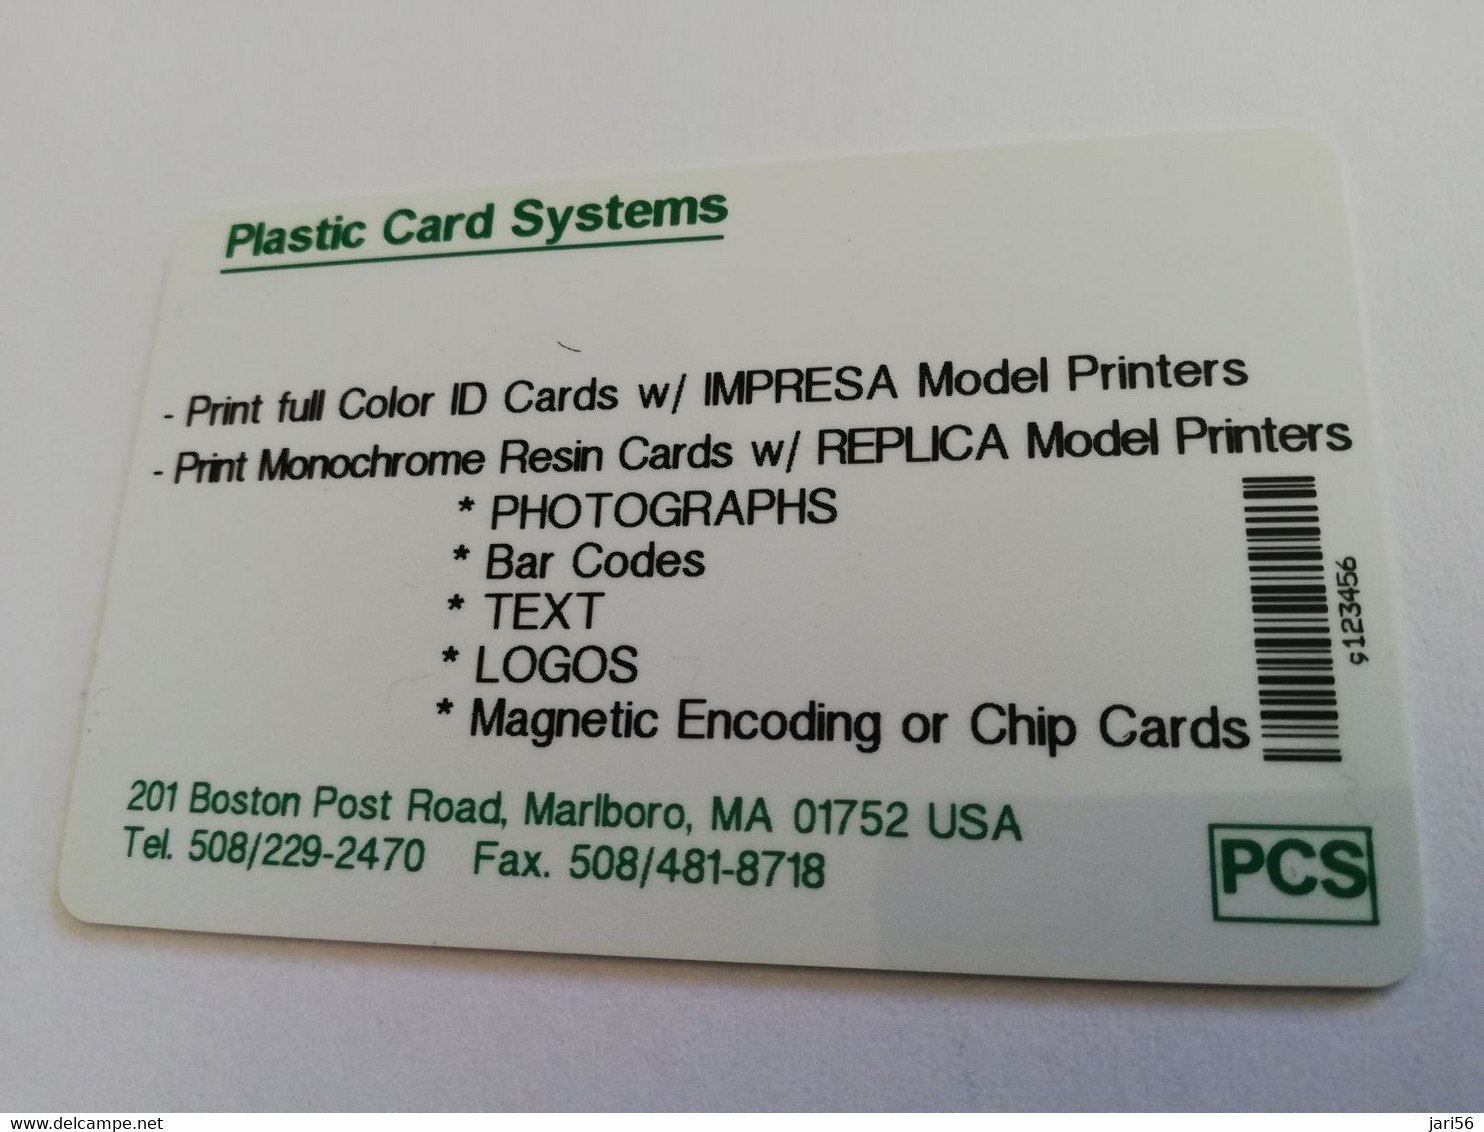 USA  $25,- SAMPLE CARD PCS PHONECARD   PLASTIC CARD SYSTEMS  WHITE HOUSE    **4325** - [2] Chip Cards